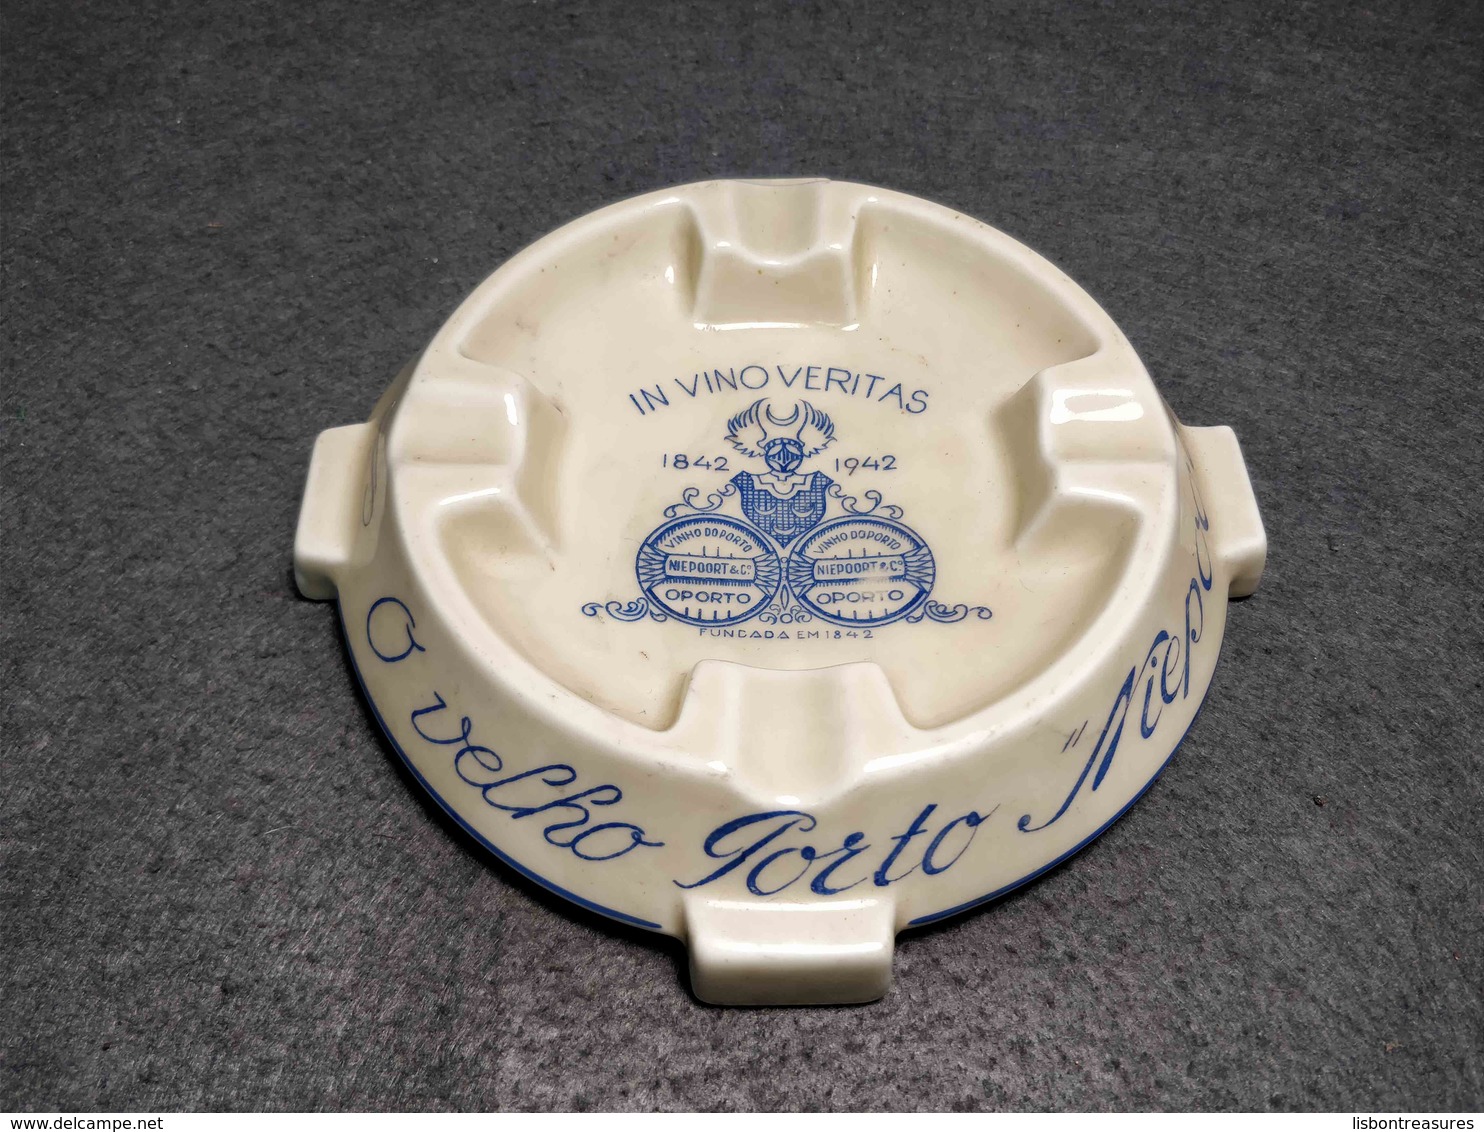 RARE VINTAGE PORCELAIN ASHTRAY ADVERTISING " NIEEPORT" PORT WINE MADE IN PORTUGAL BY CANDAL - Porcelana